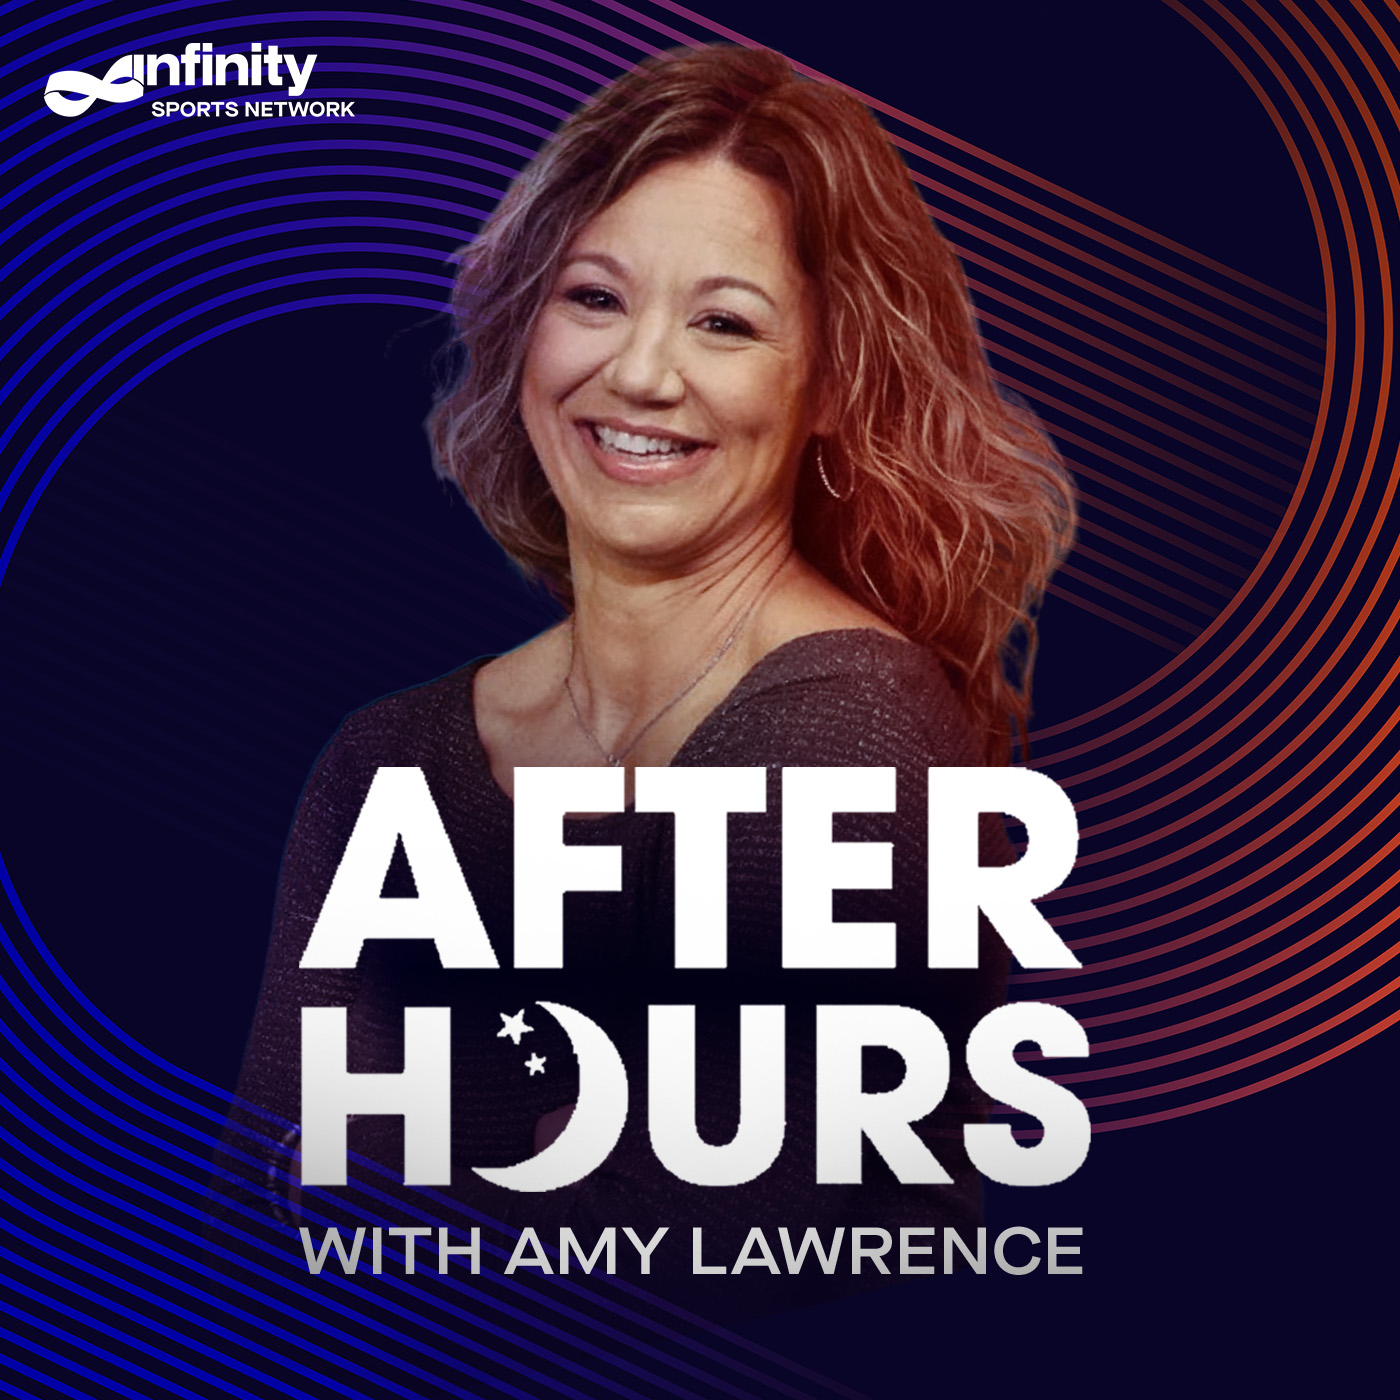 7/27/21 After Hours with Amy Lawrence PODCAST: Hour 3